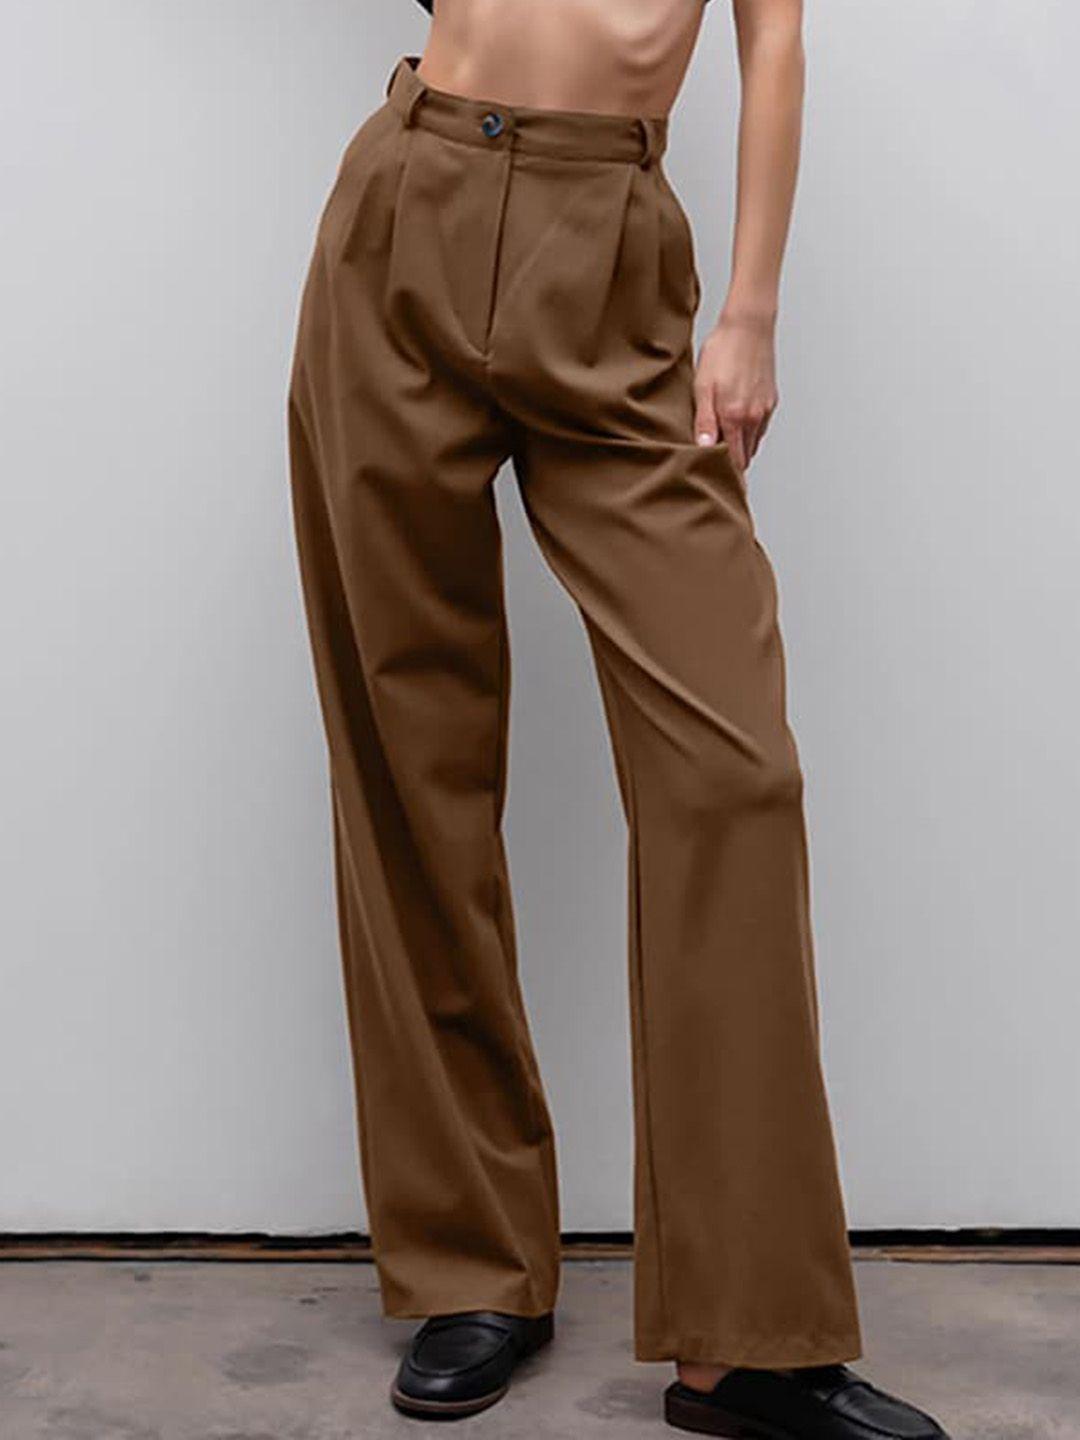 stylecast women brown flared trousers